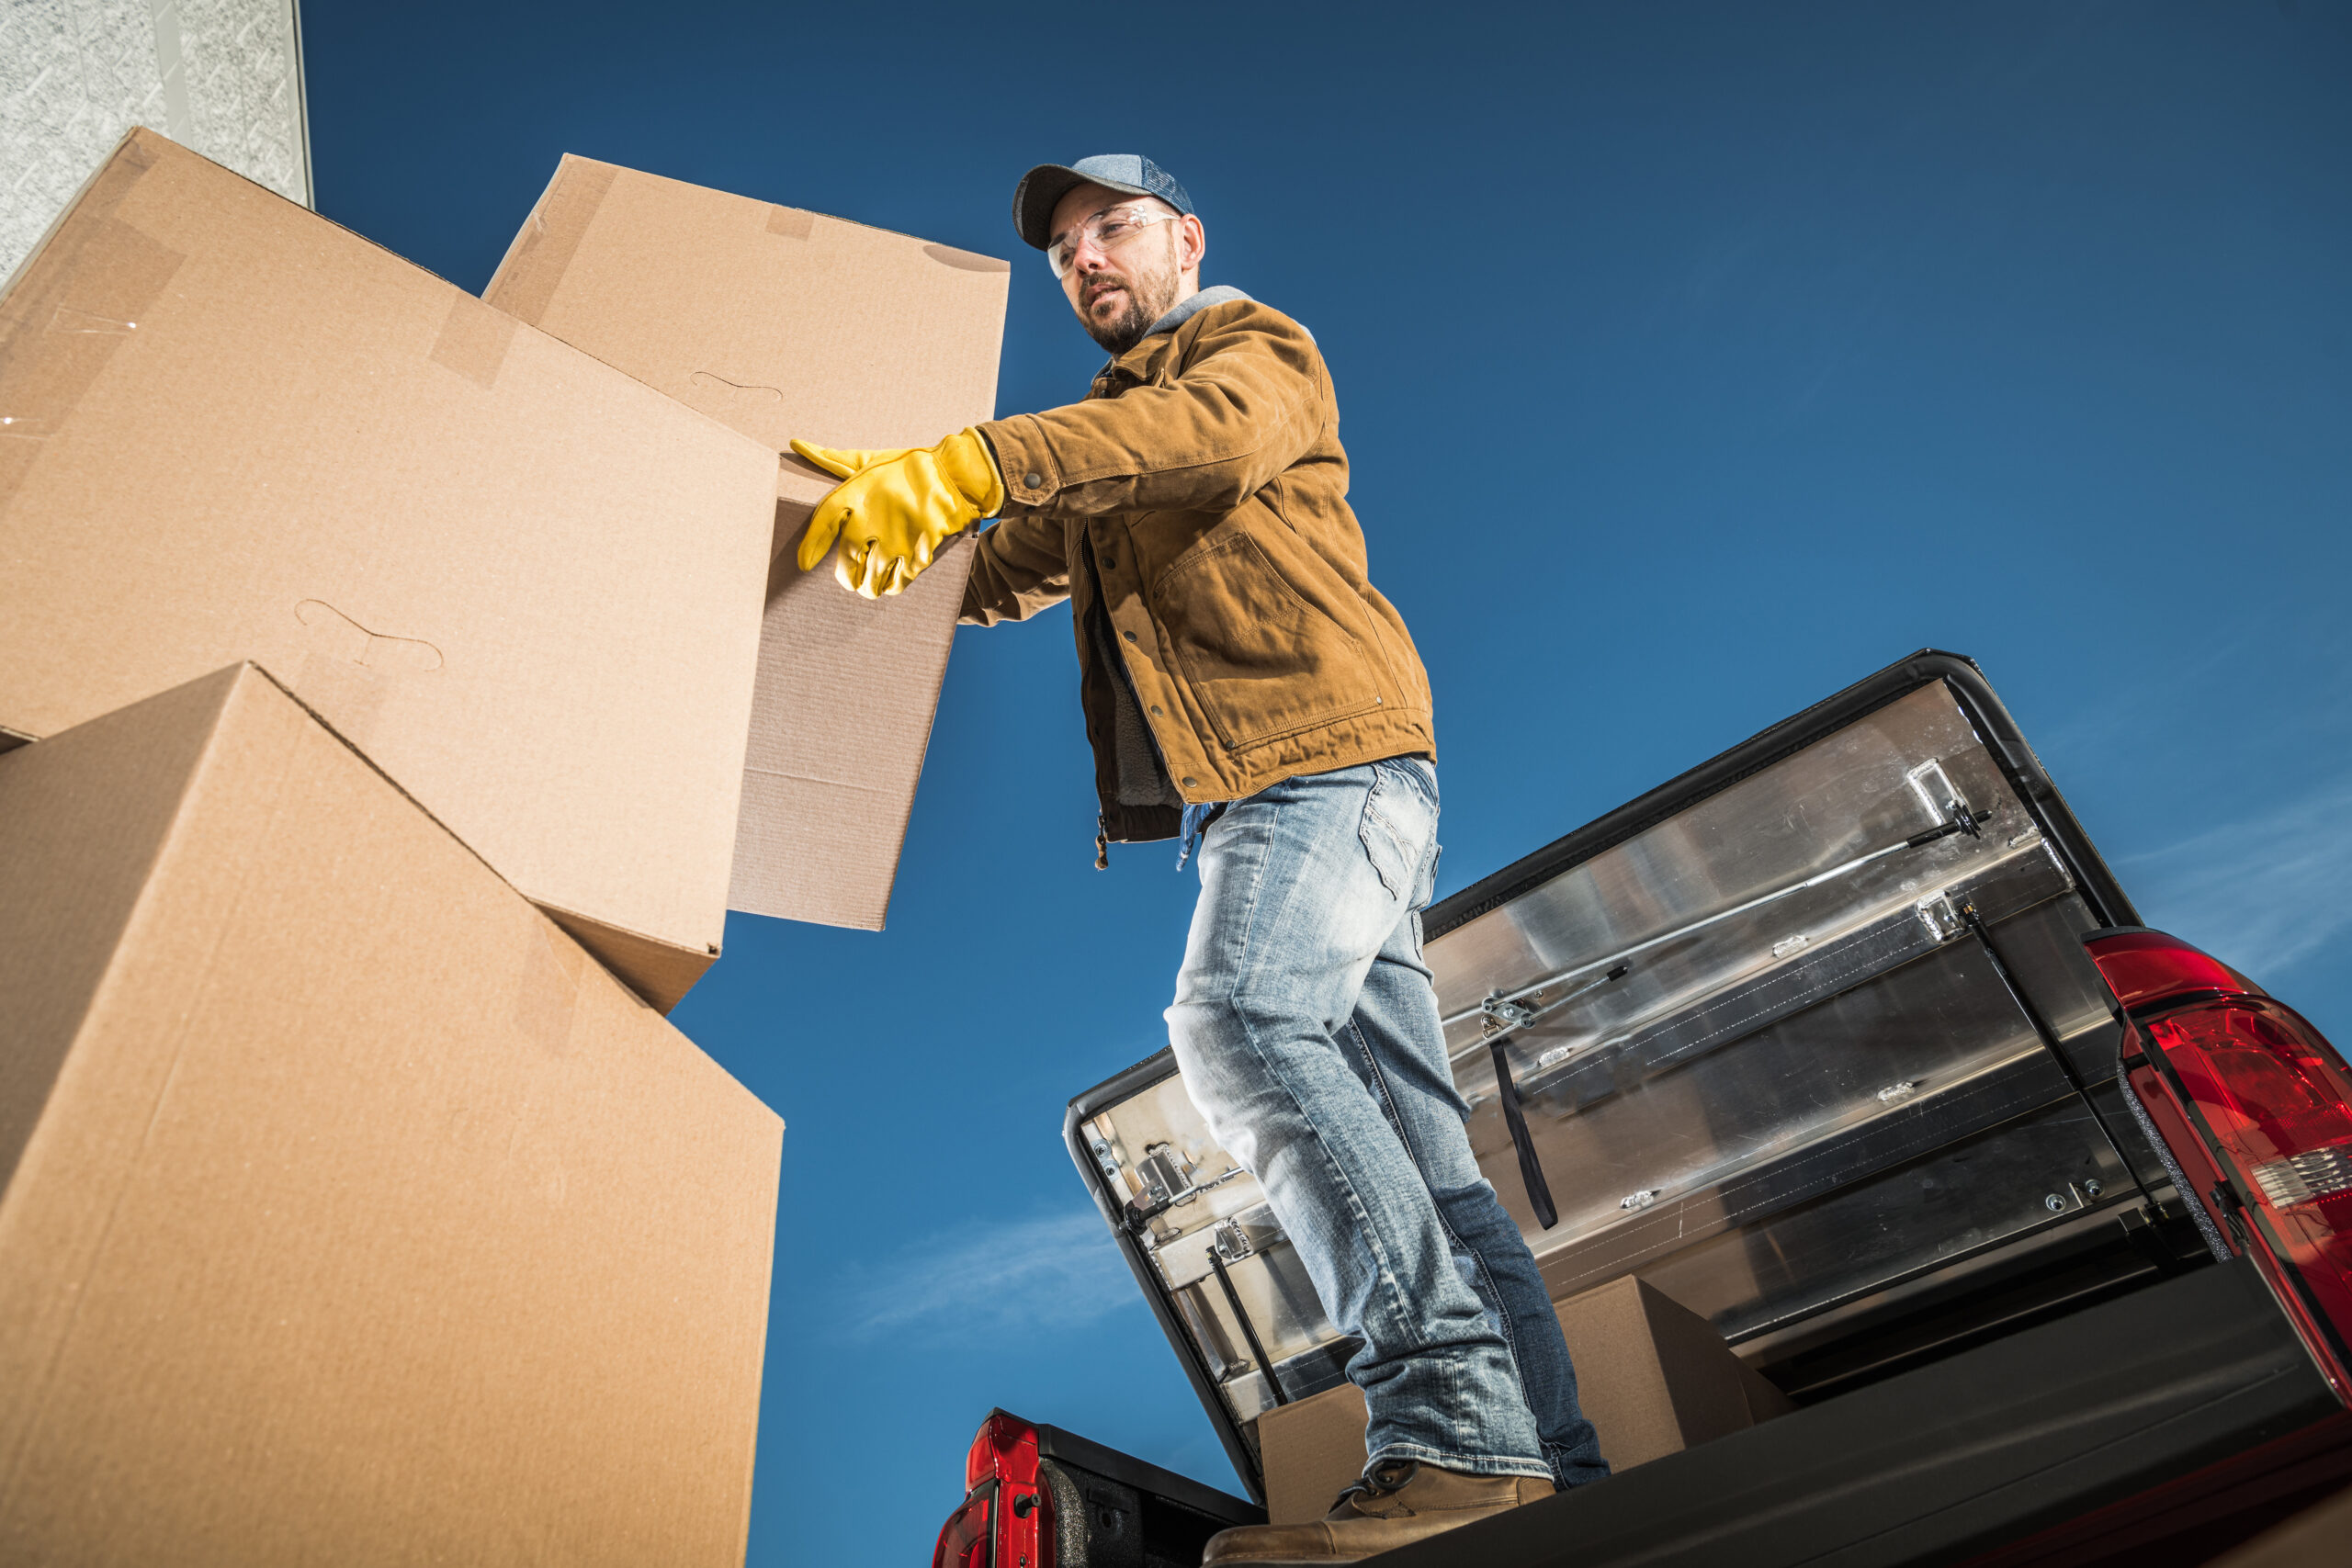 A man skilled in expert removals loading boxes into the back of a truck.